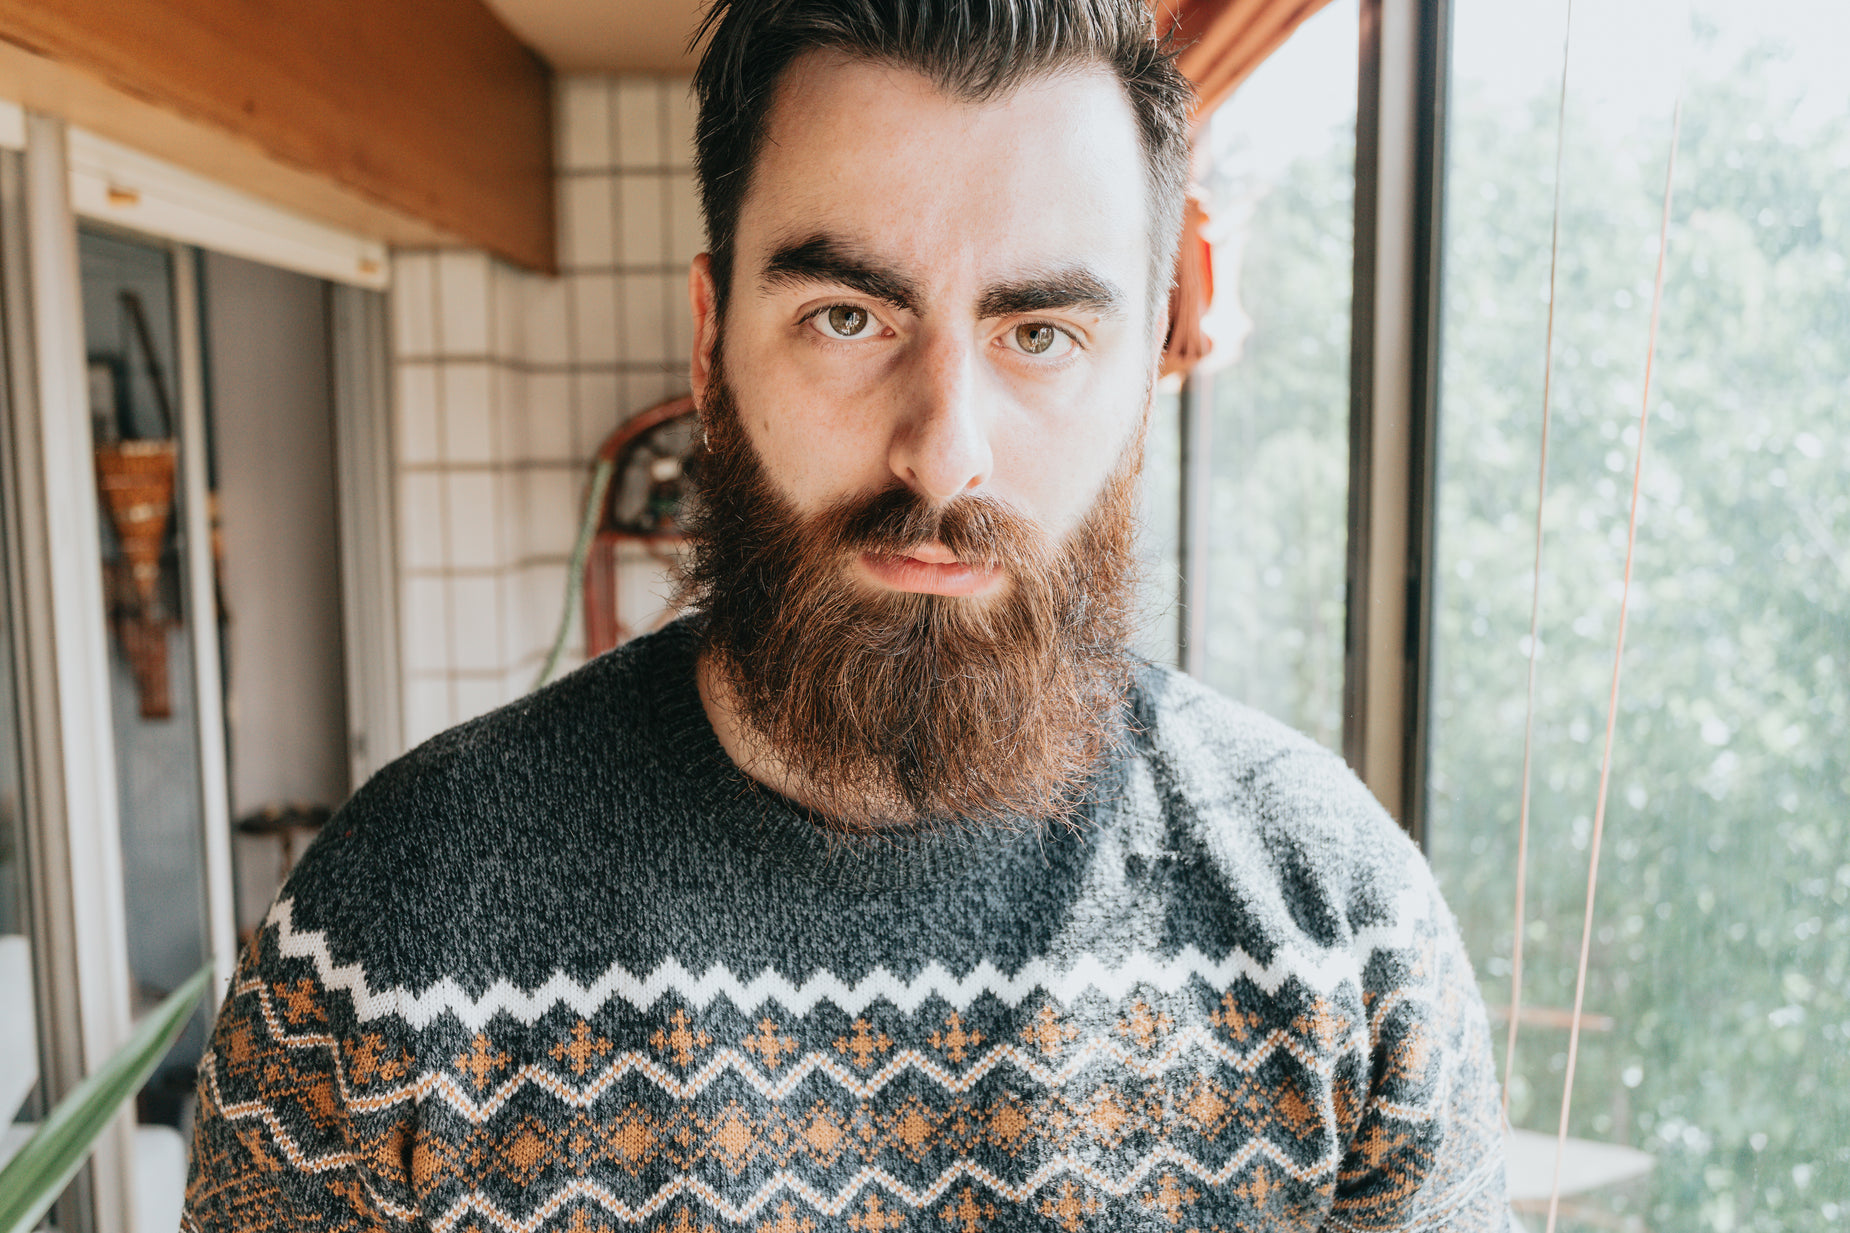 a man with a beard and patterned sweater looks intently ahead